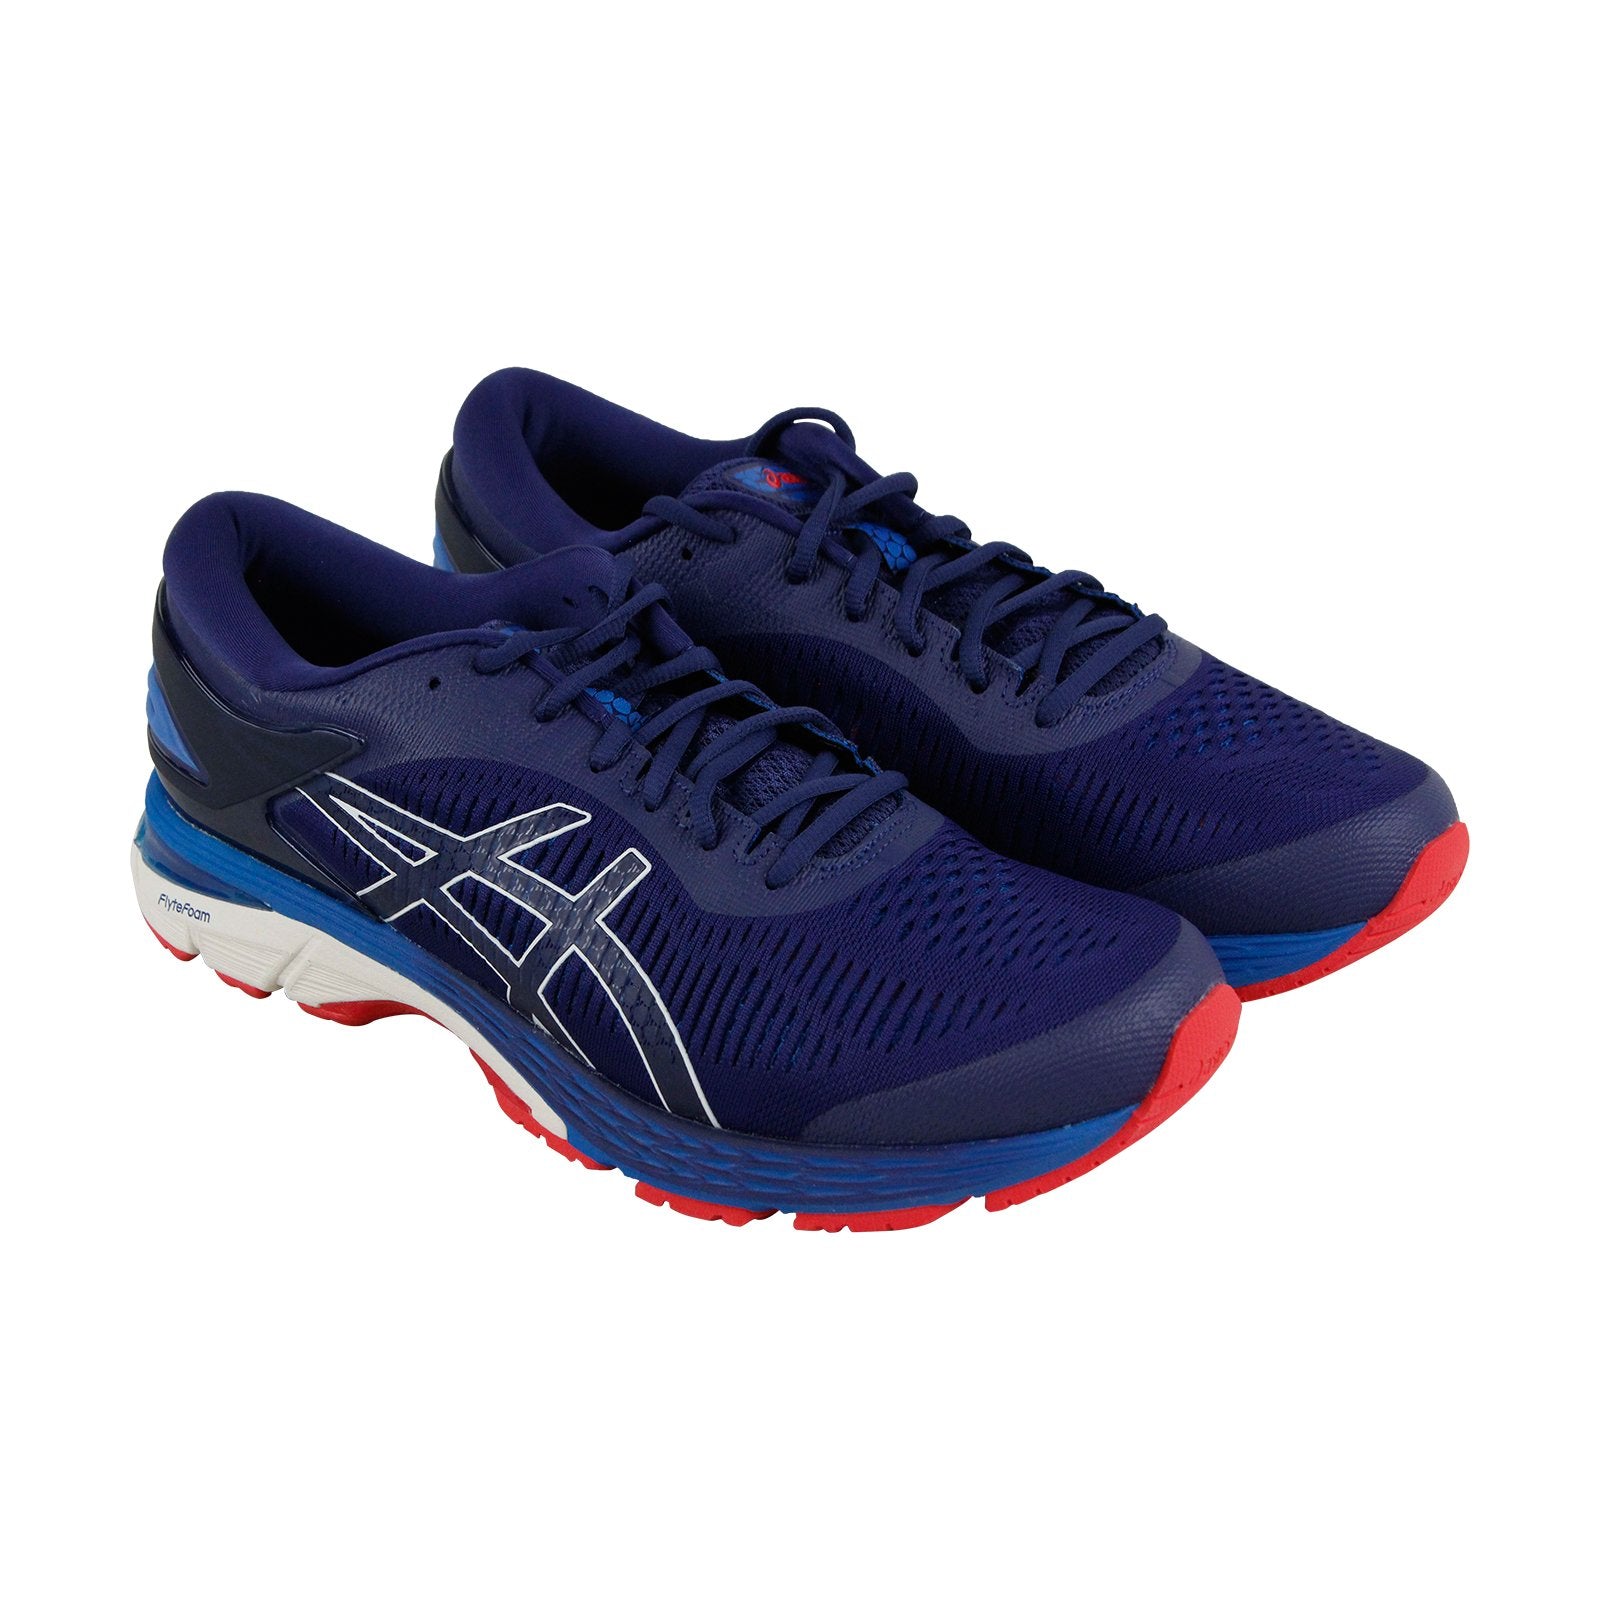 Asics Gel Kayano 25 1011A019-400 Mens Blue Canvas Lace Up Athletic Run Ruze Shoes